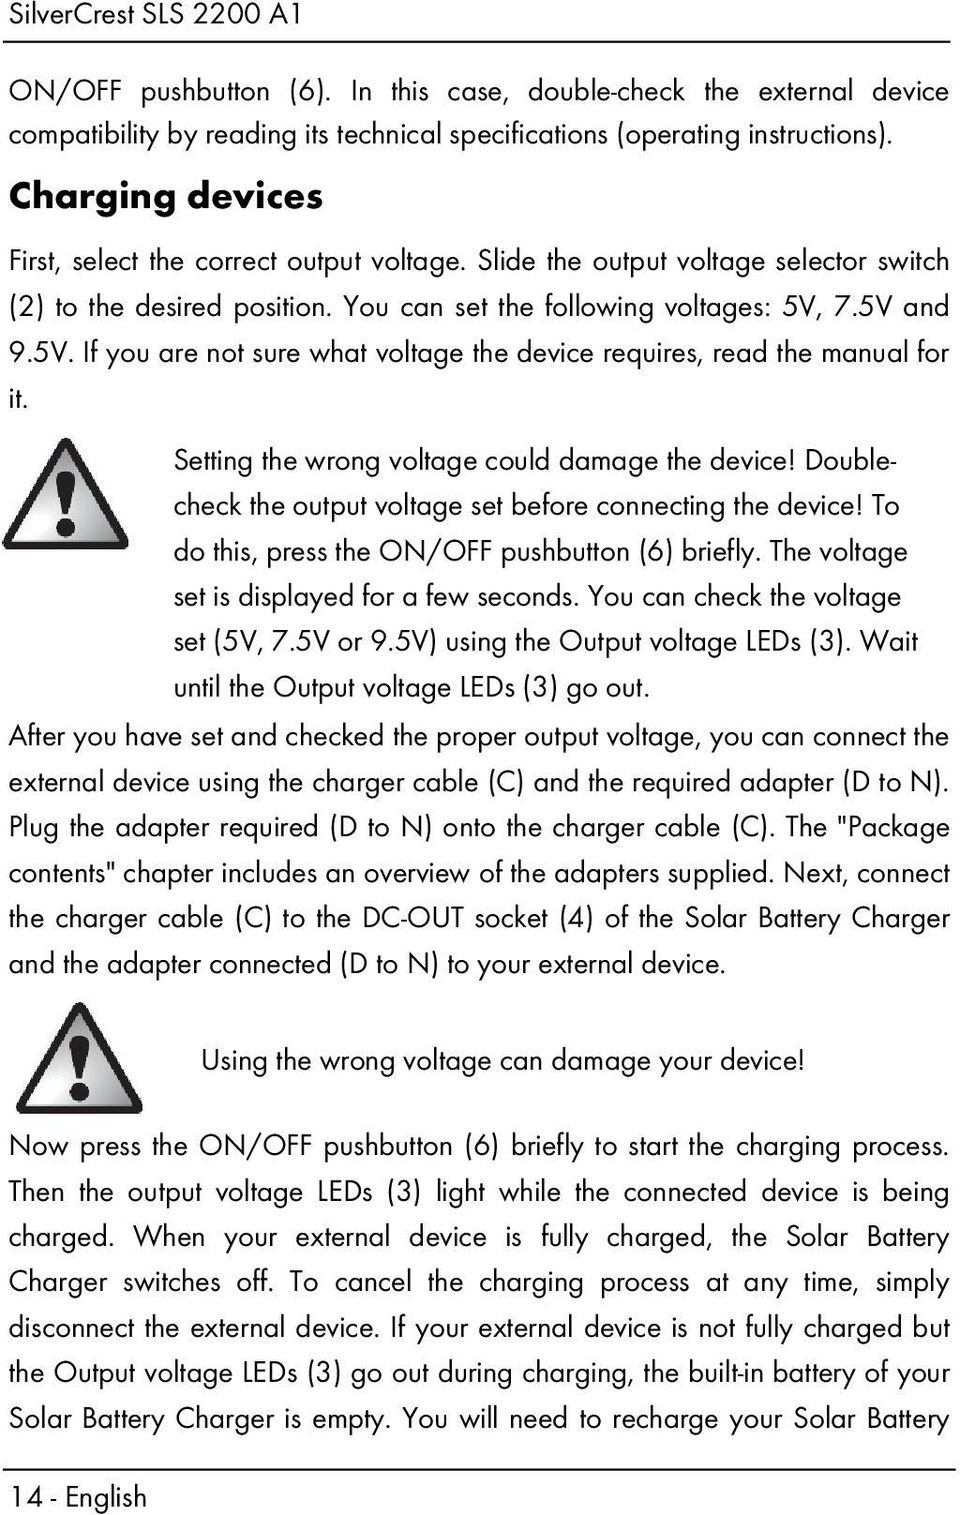 7.5V and 9.5V. If you are not sure what voltage the device requires, read the manual for it. Setting the wrong voltage could damage the device!